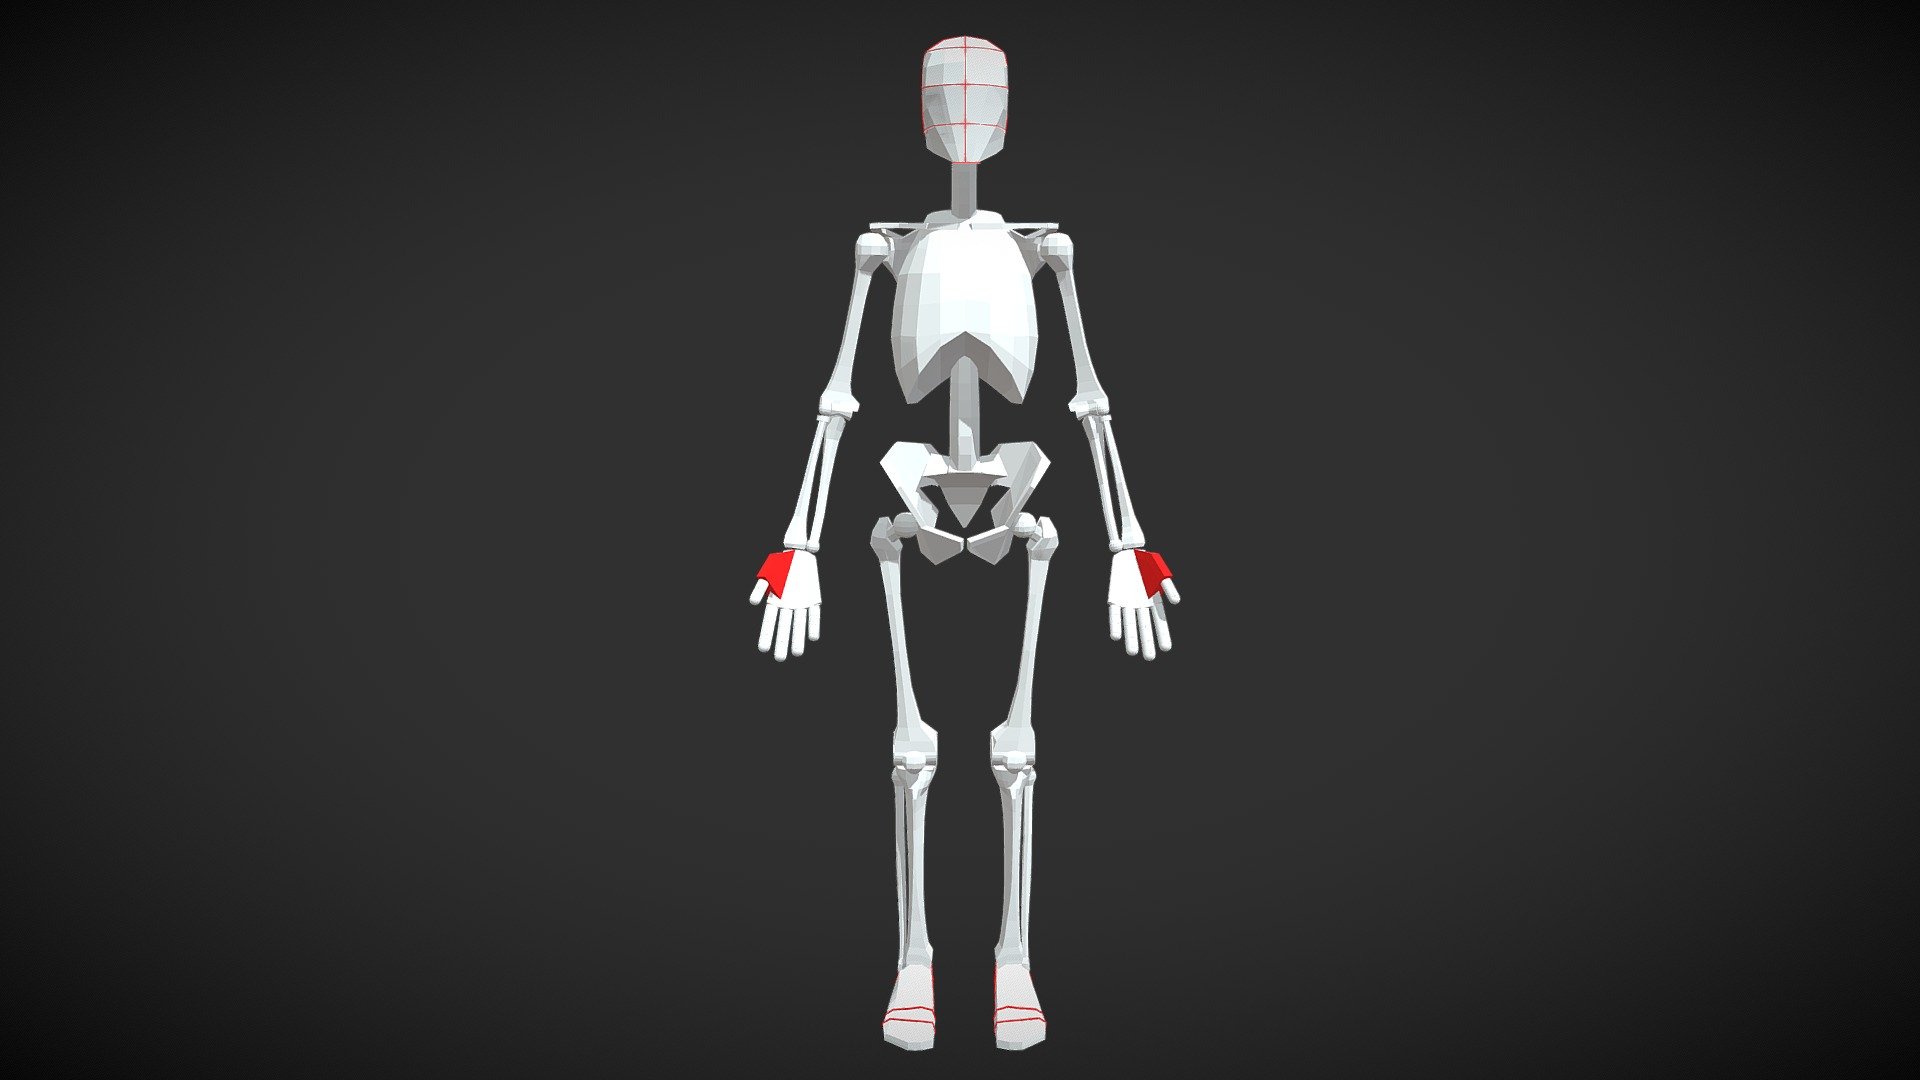 Anatomically accurate male skeleton model for artists.

Created very precisely with years of human anatomy study. 

I had not been able to find any good model for my own figure drawing study.

So I create one myself.

Hope this model will help your study as well 3d model